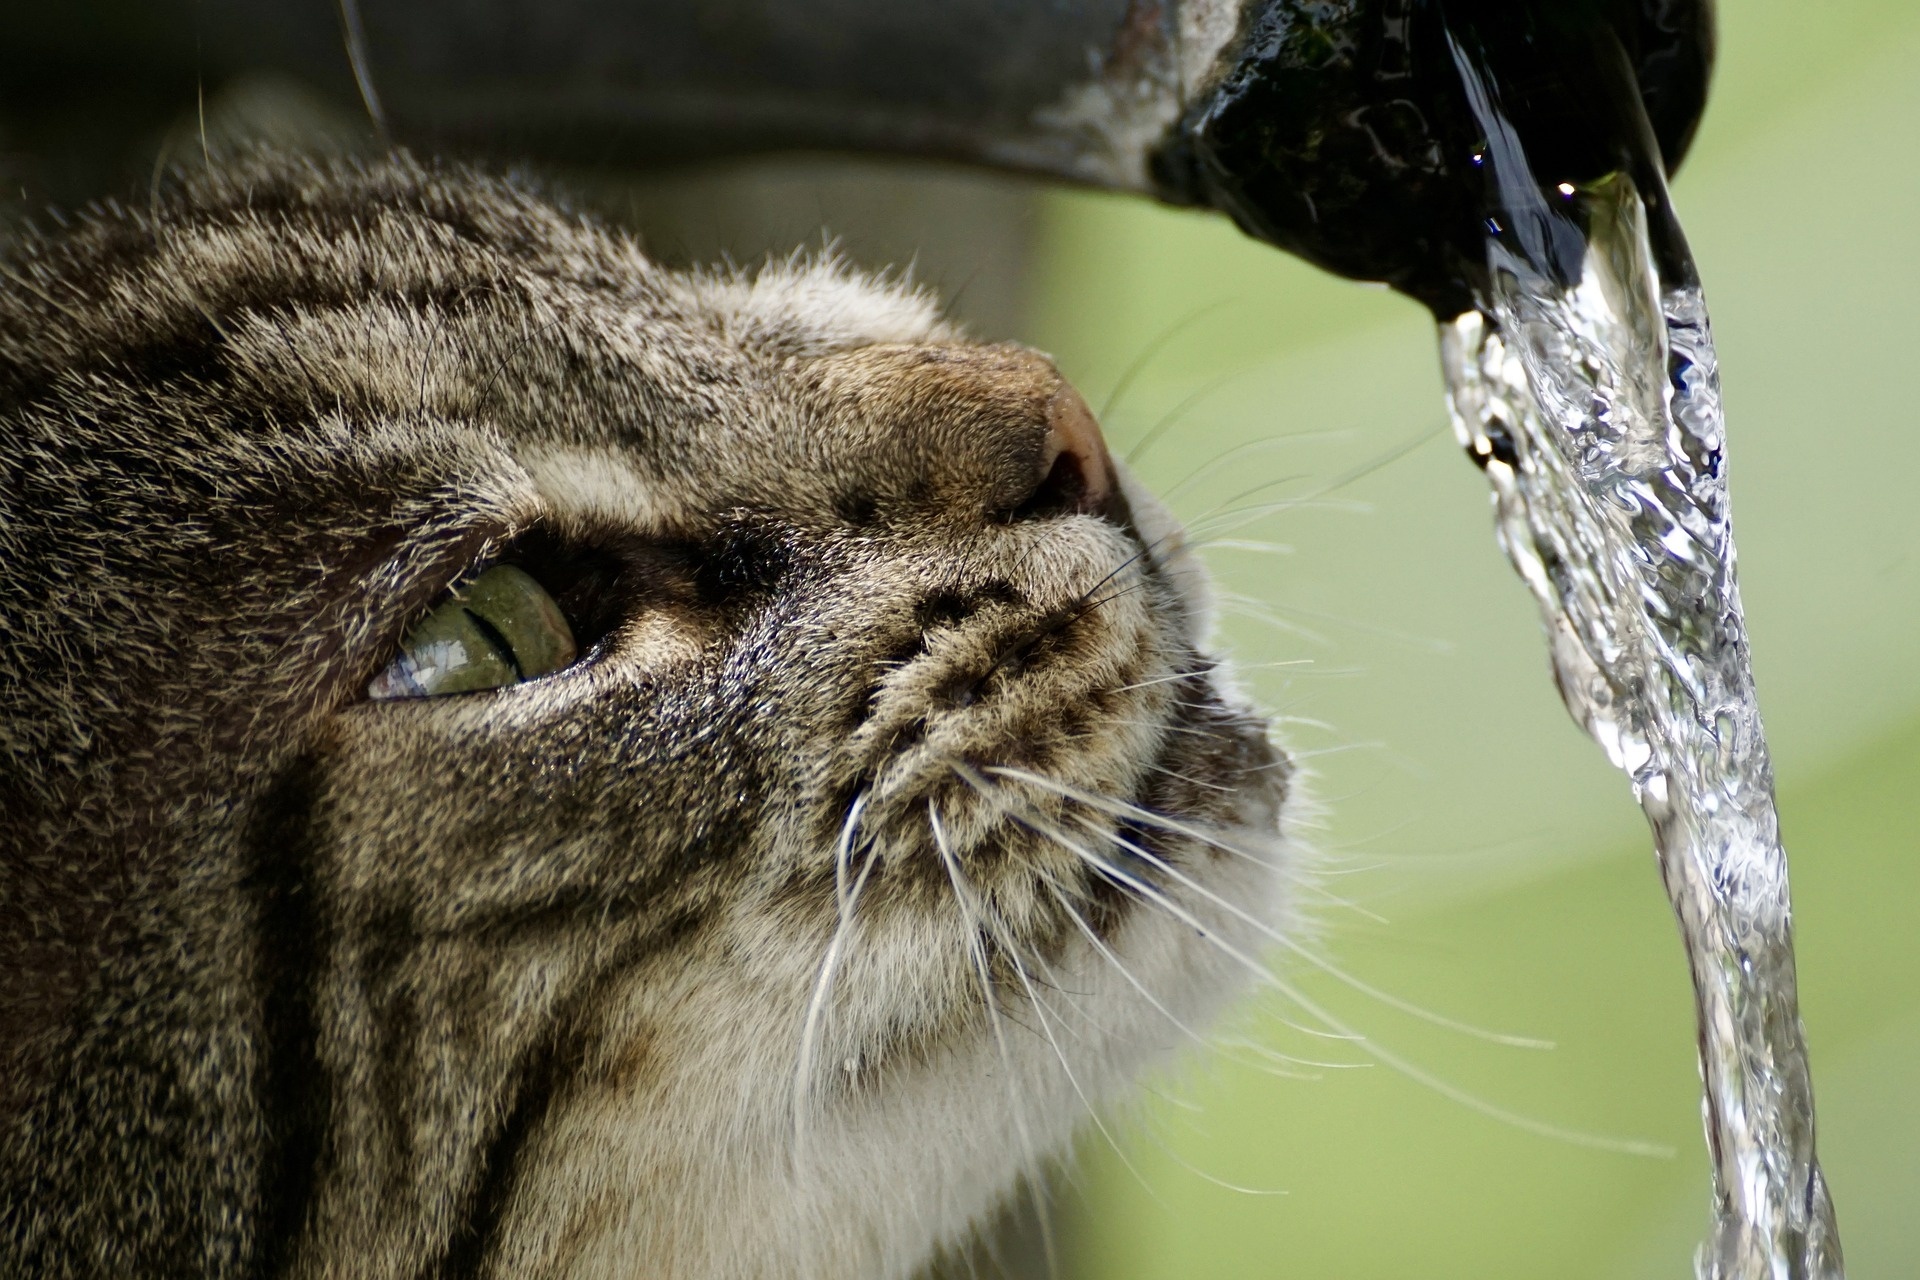 cat is drinking water but not eating